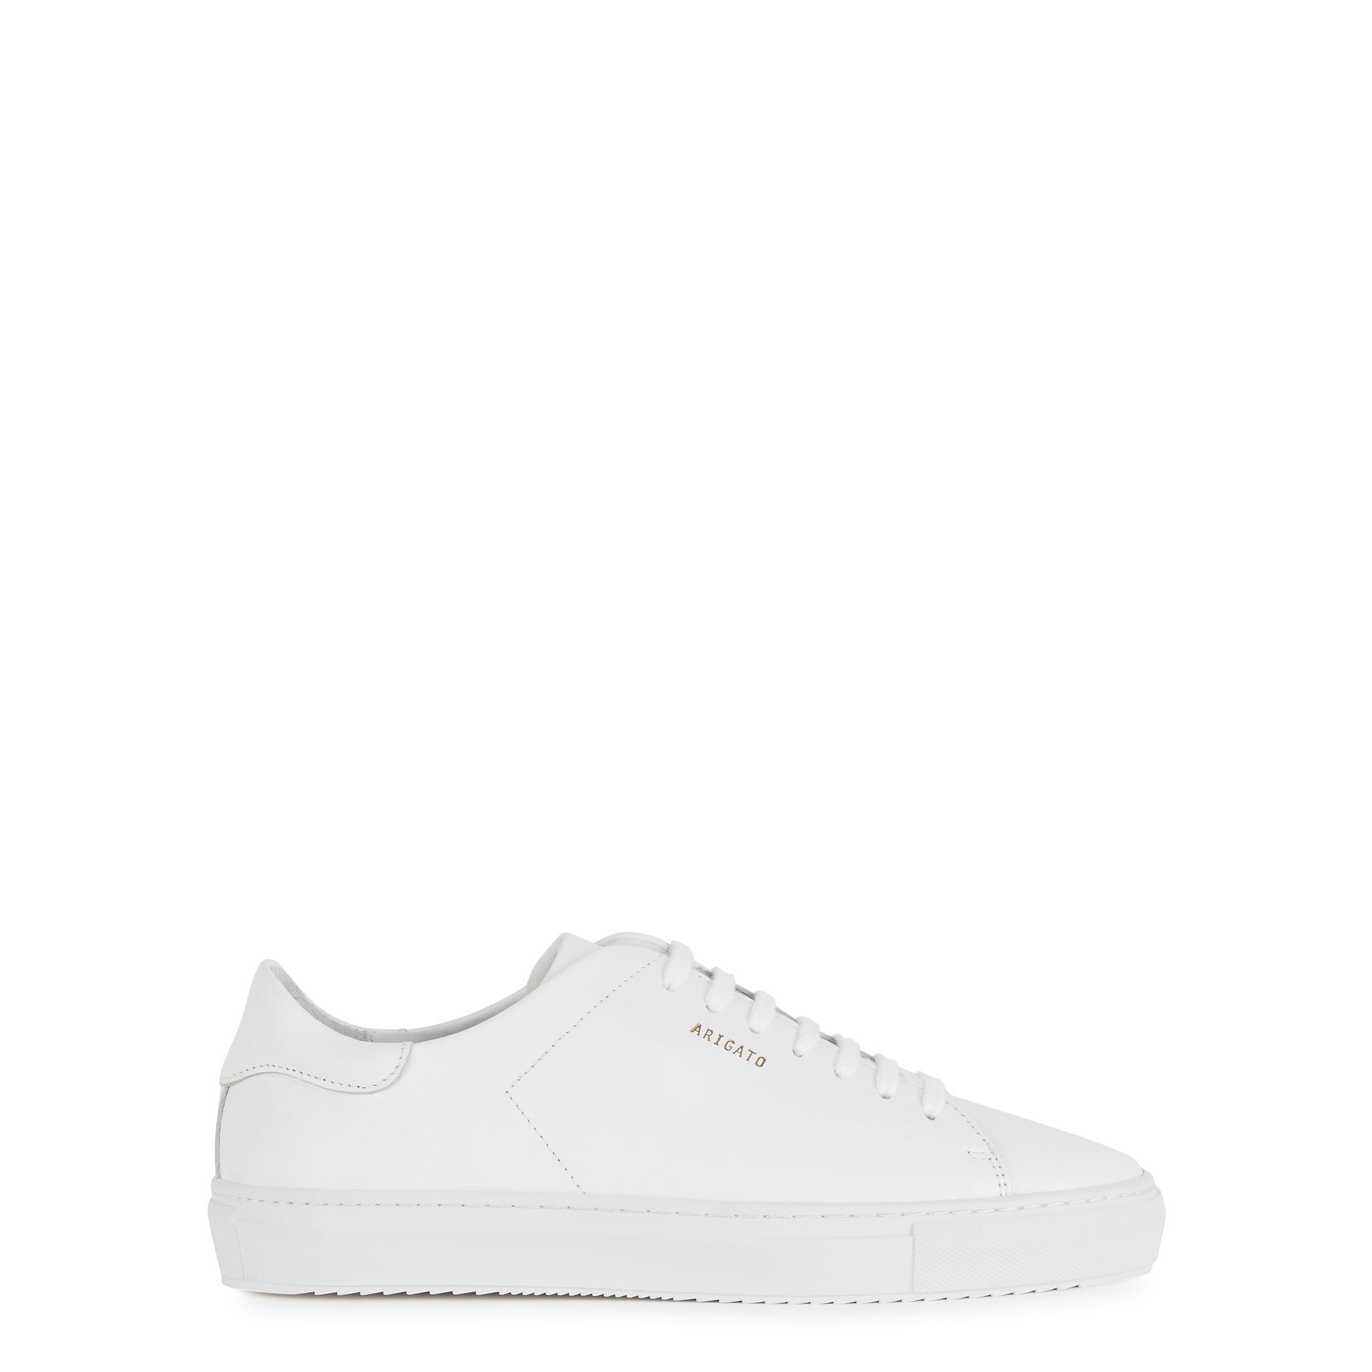 Axel Arigato Clean 90 White Leather Sneakers - 7